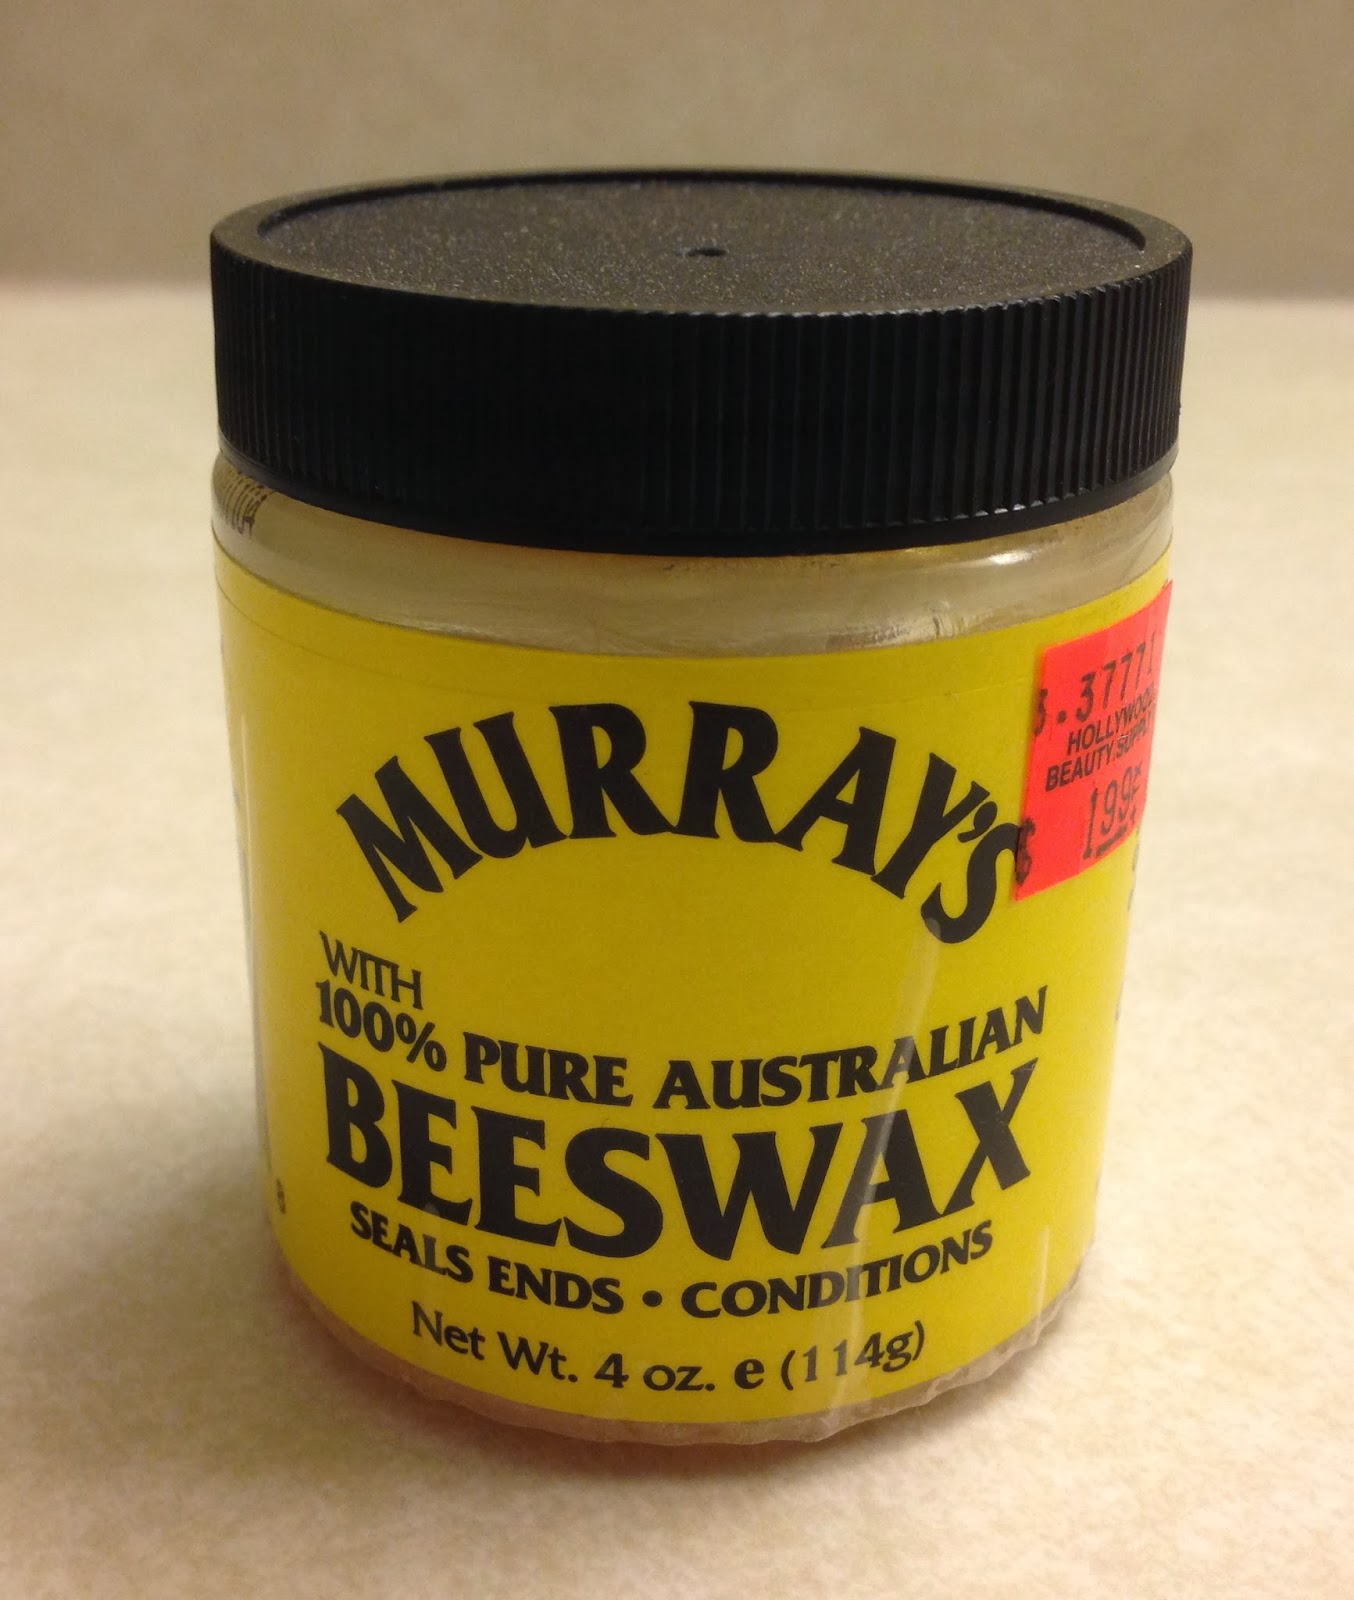 The Roosters Den: Murray's Beeswax Review